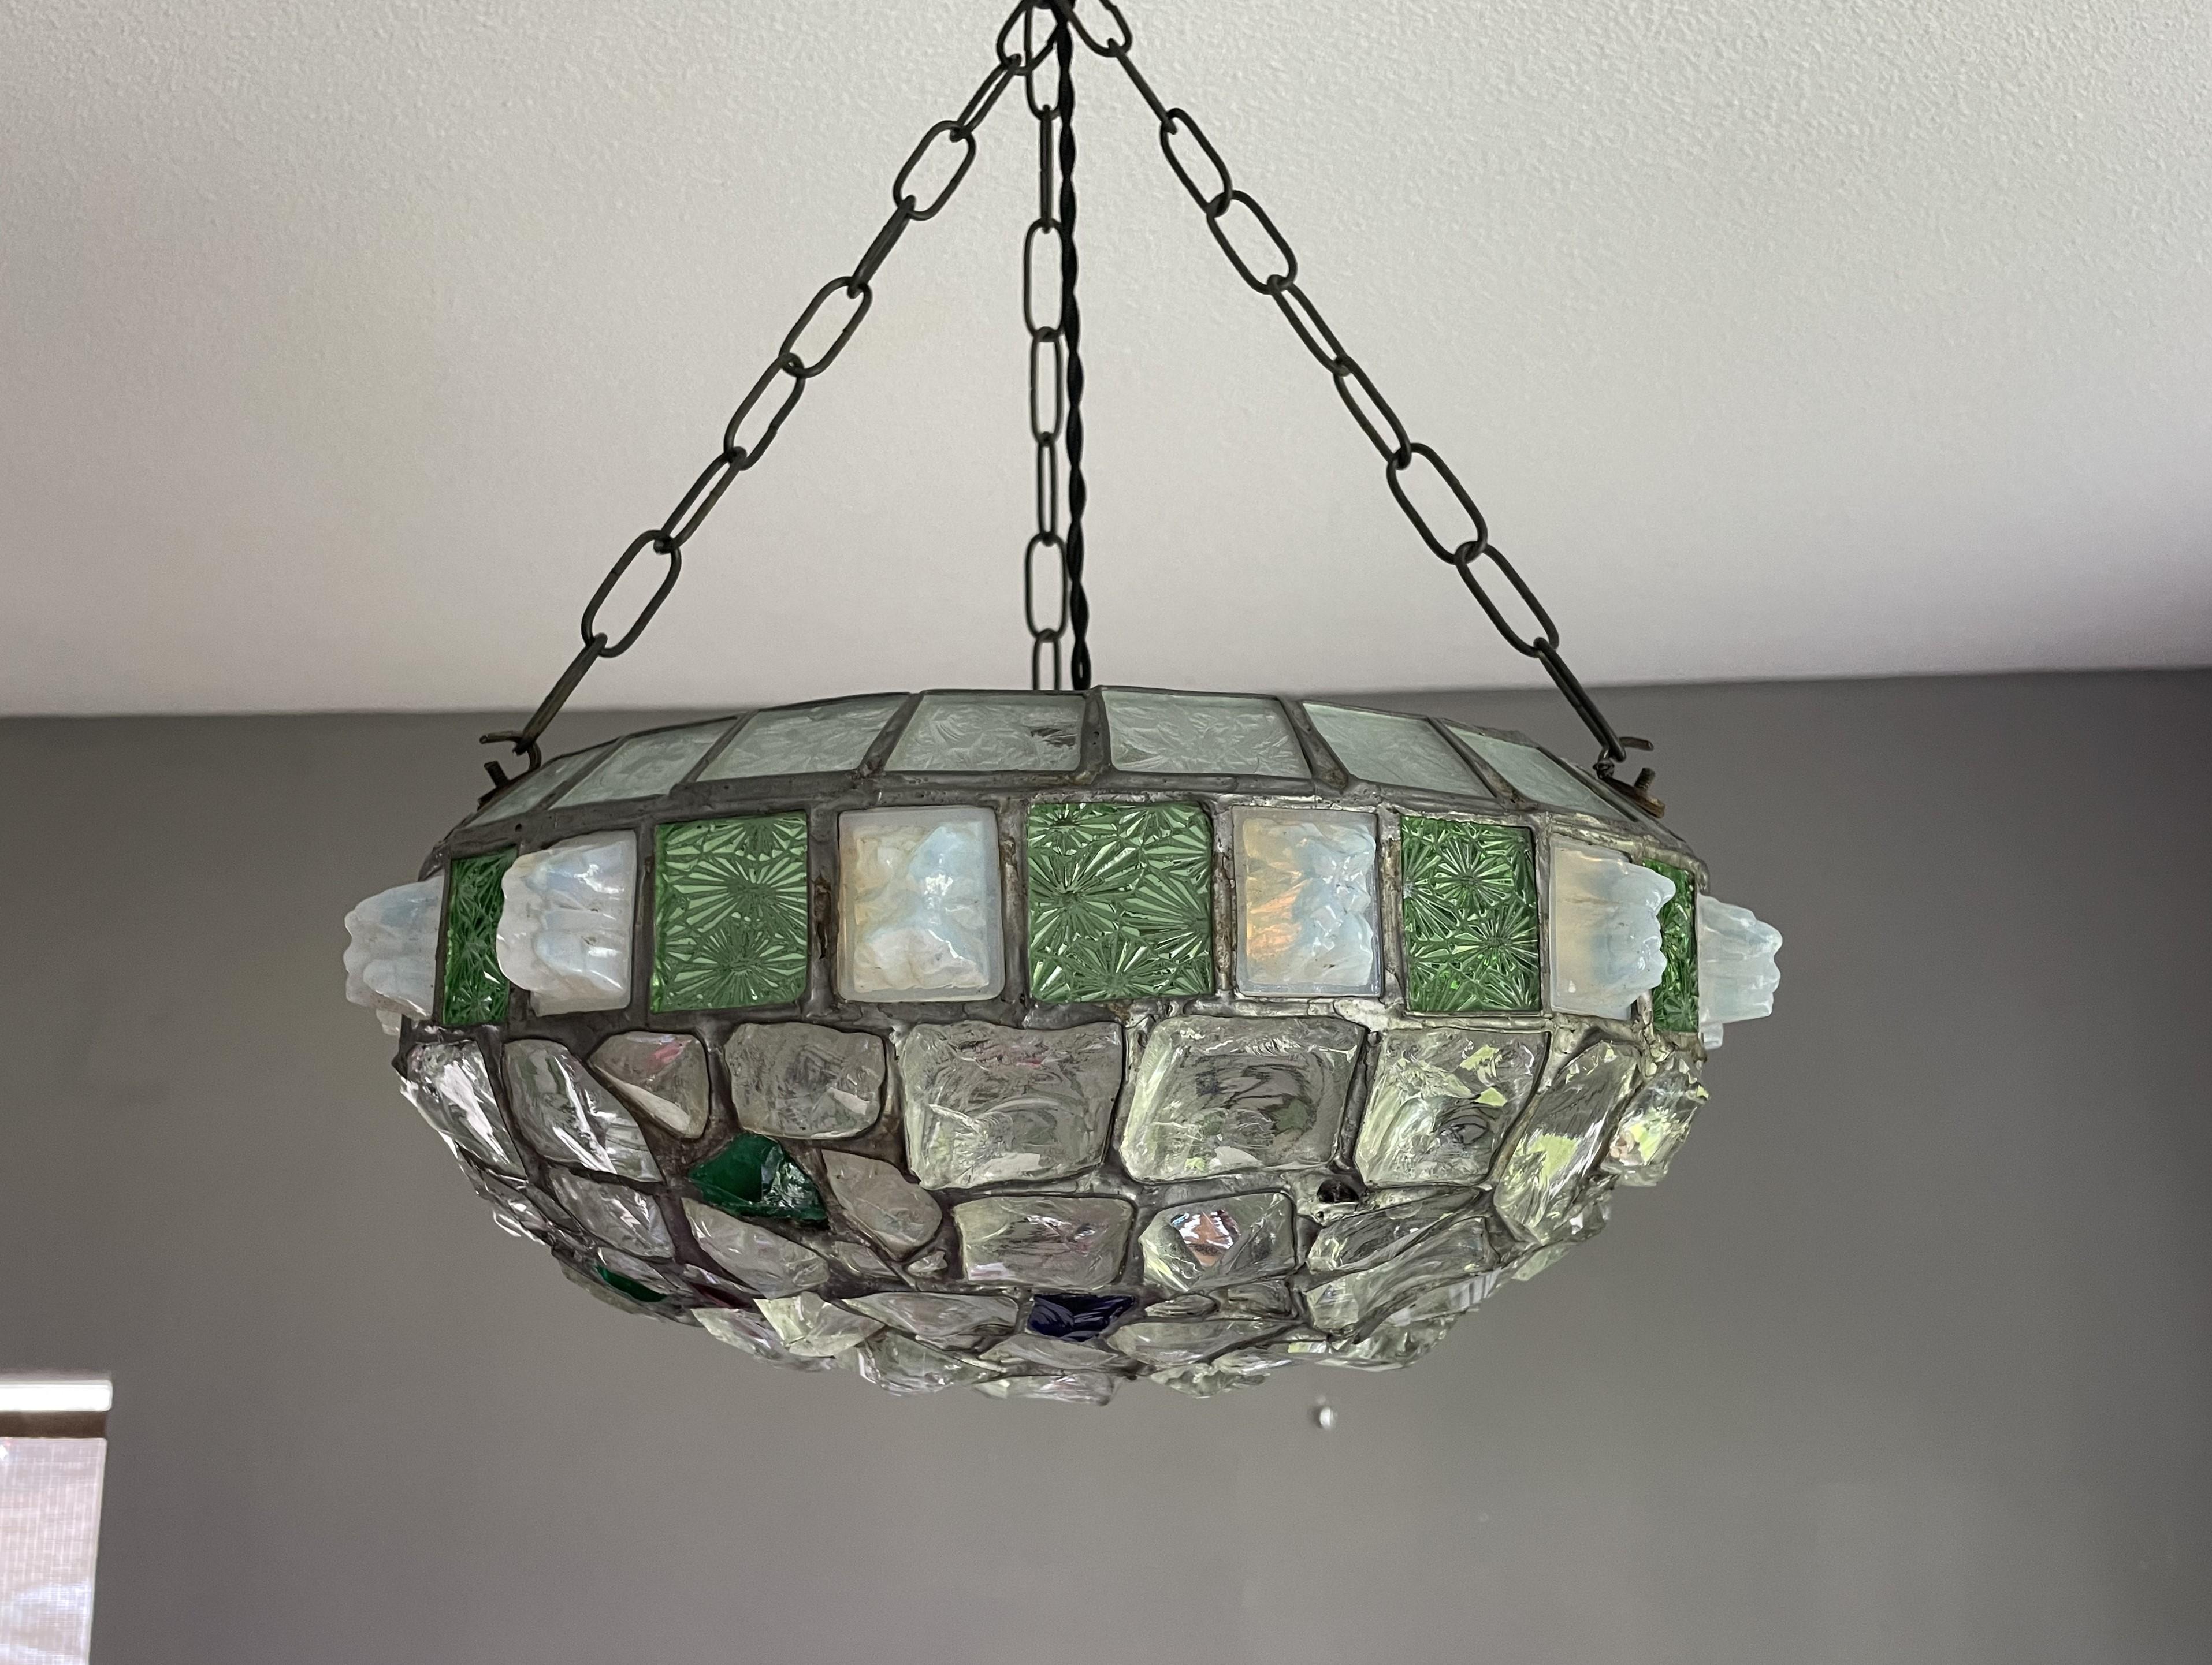 Handmade Glorious Antique Stained & Chunky Glass Arts & Craft Pendant Light im Zustand „Hervorragend“ im Angebot in Lisse, NL